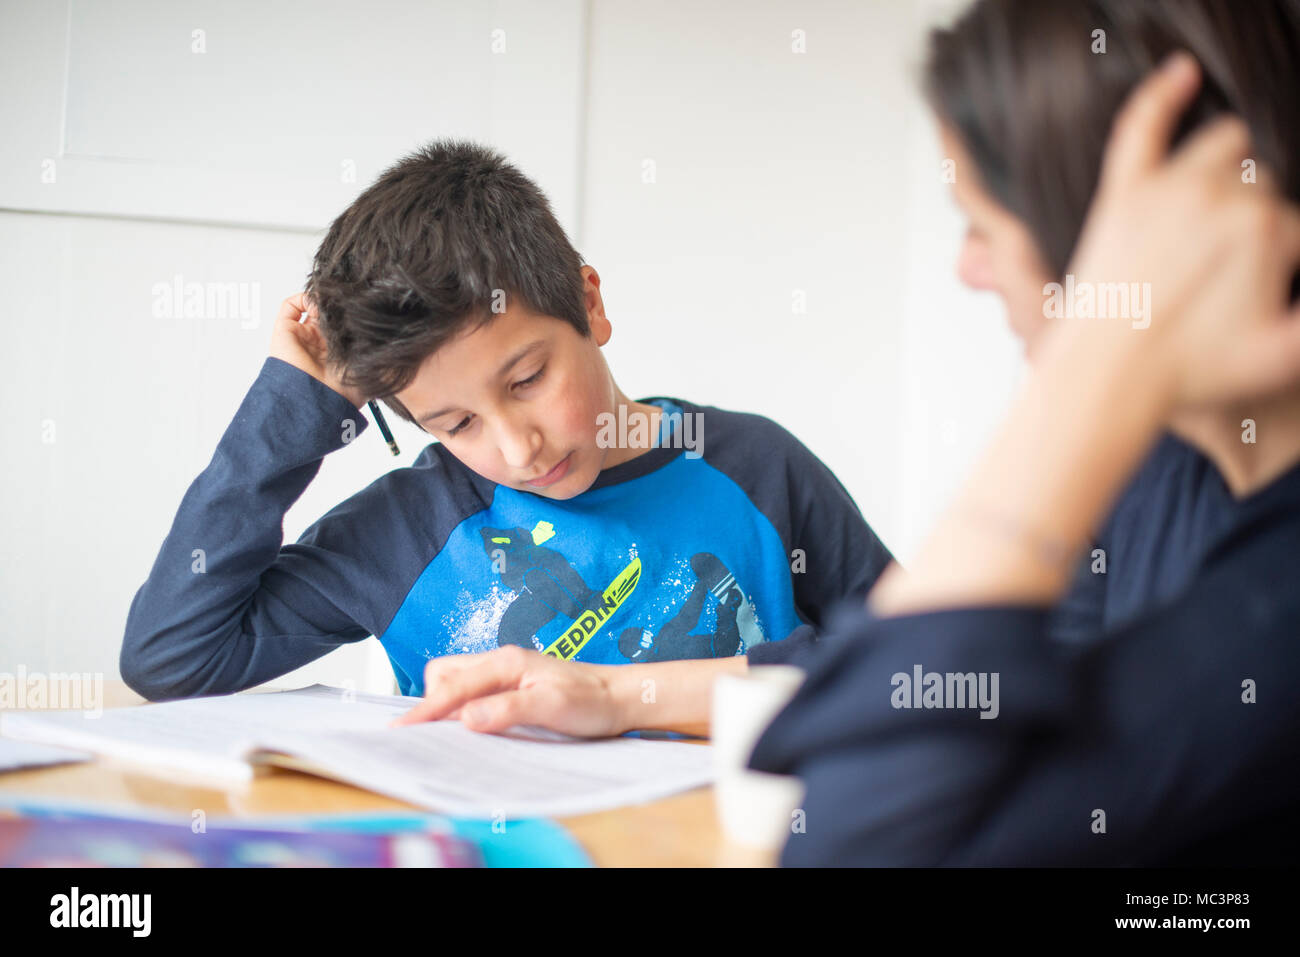 Private tutoring at home-10-11 years boy  having a maths lesson at home-selective focus Stock Photo